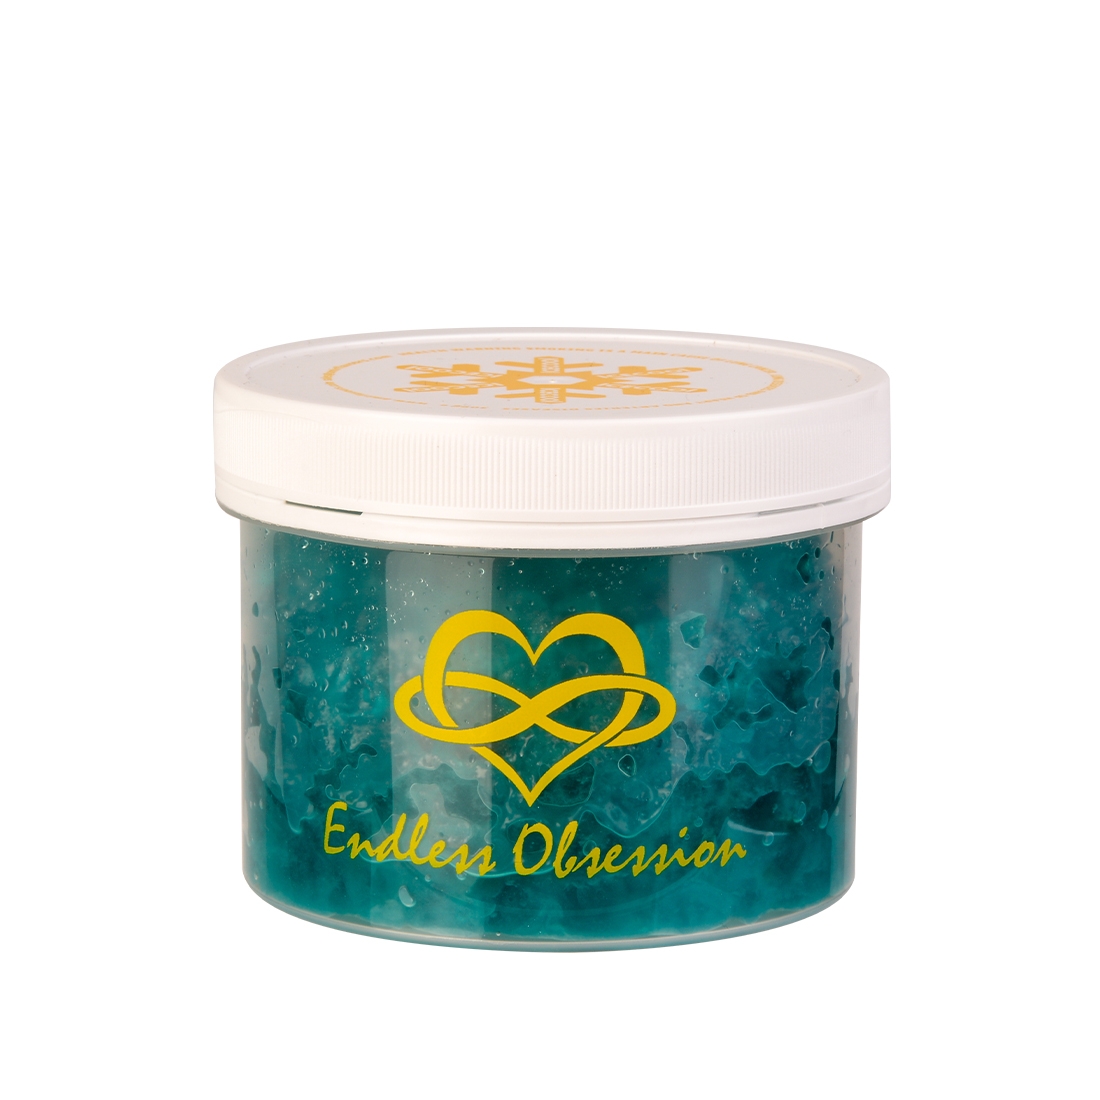 GEL A CHICHA ICECOOL ENDLESS OBSESSION 300GR